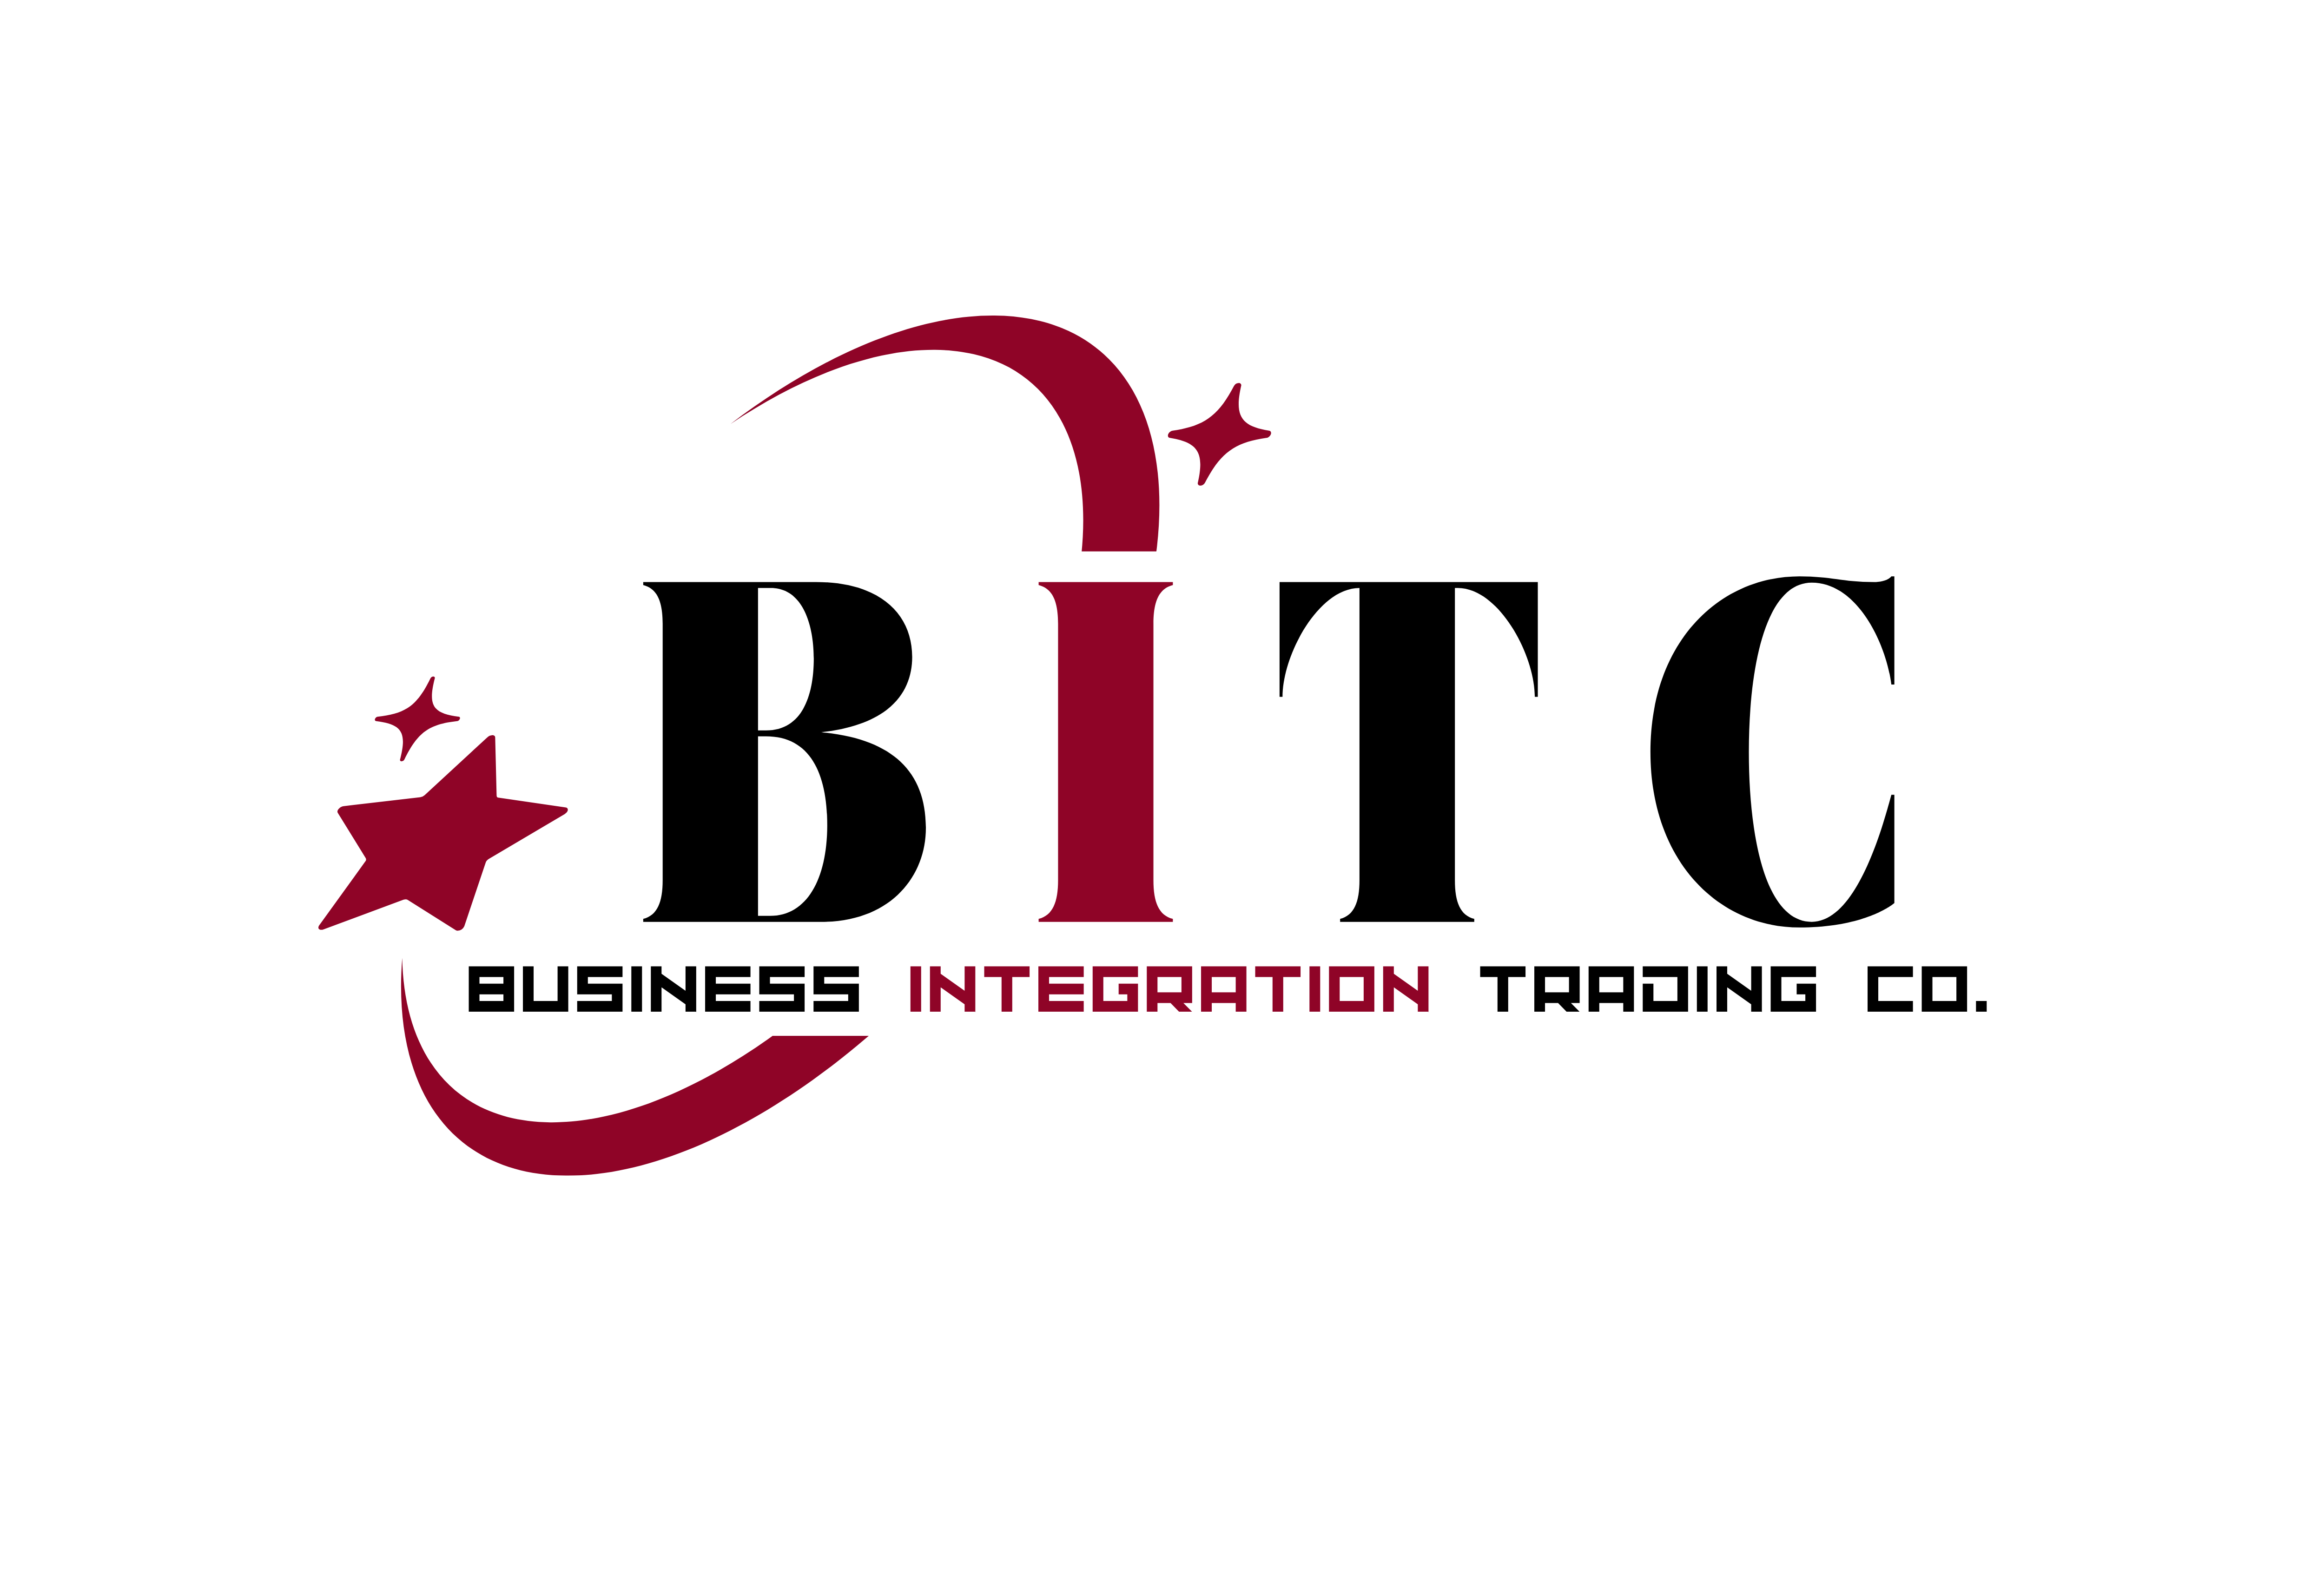 BUSINESS INTEGRATION TRADING CO. (1)